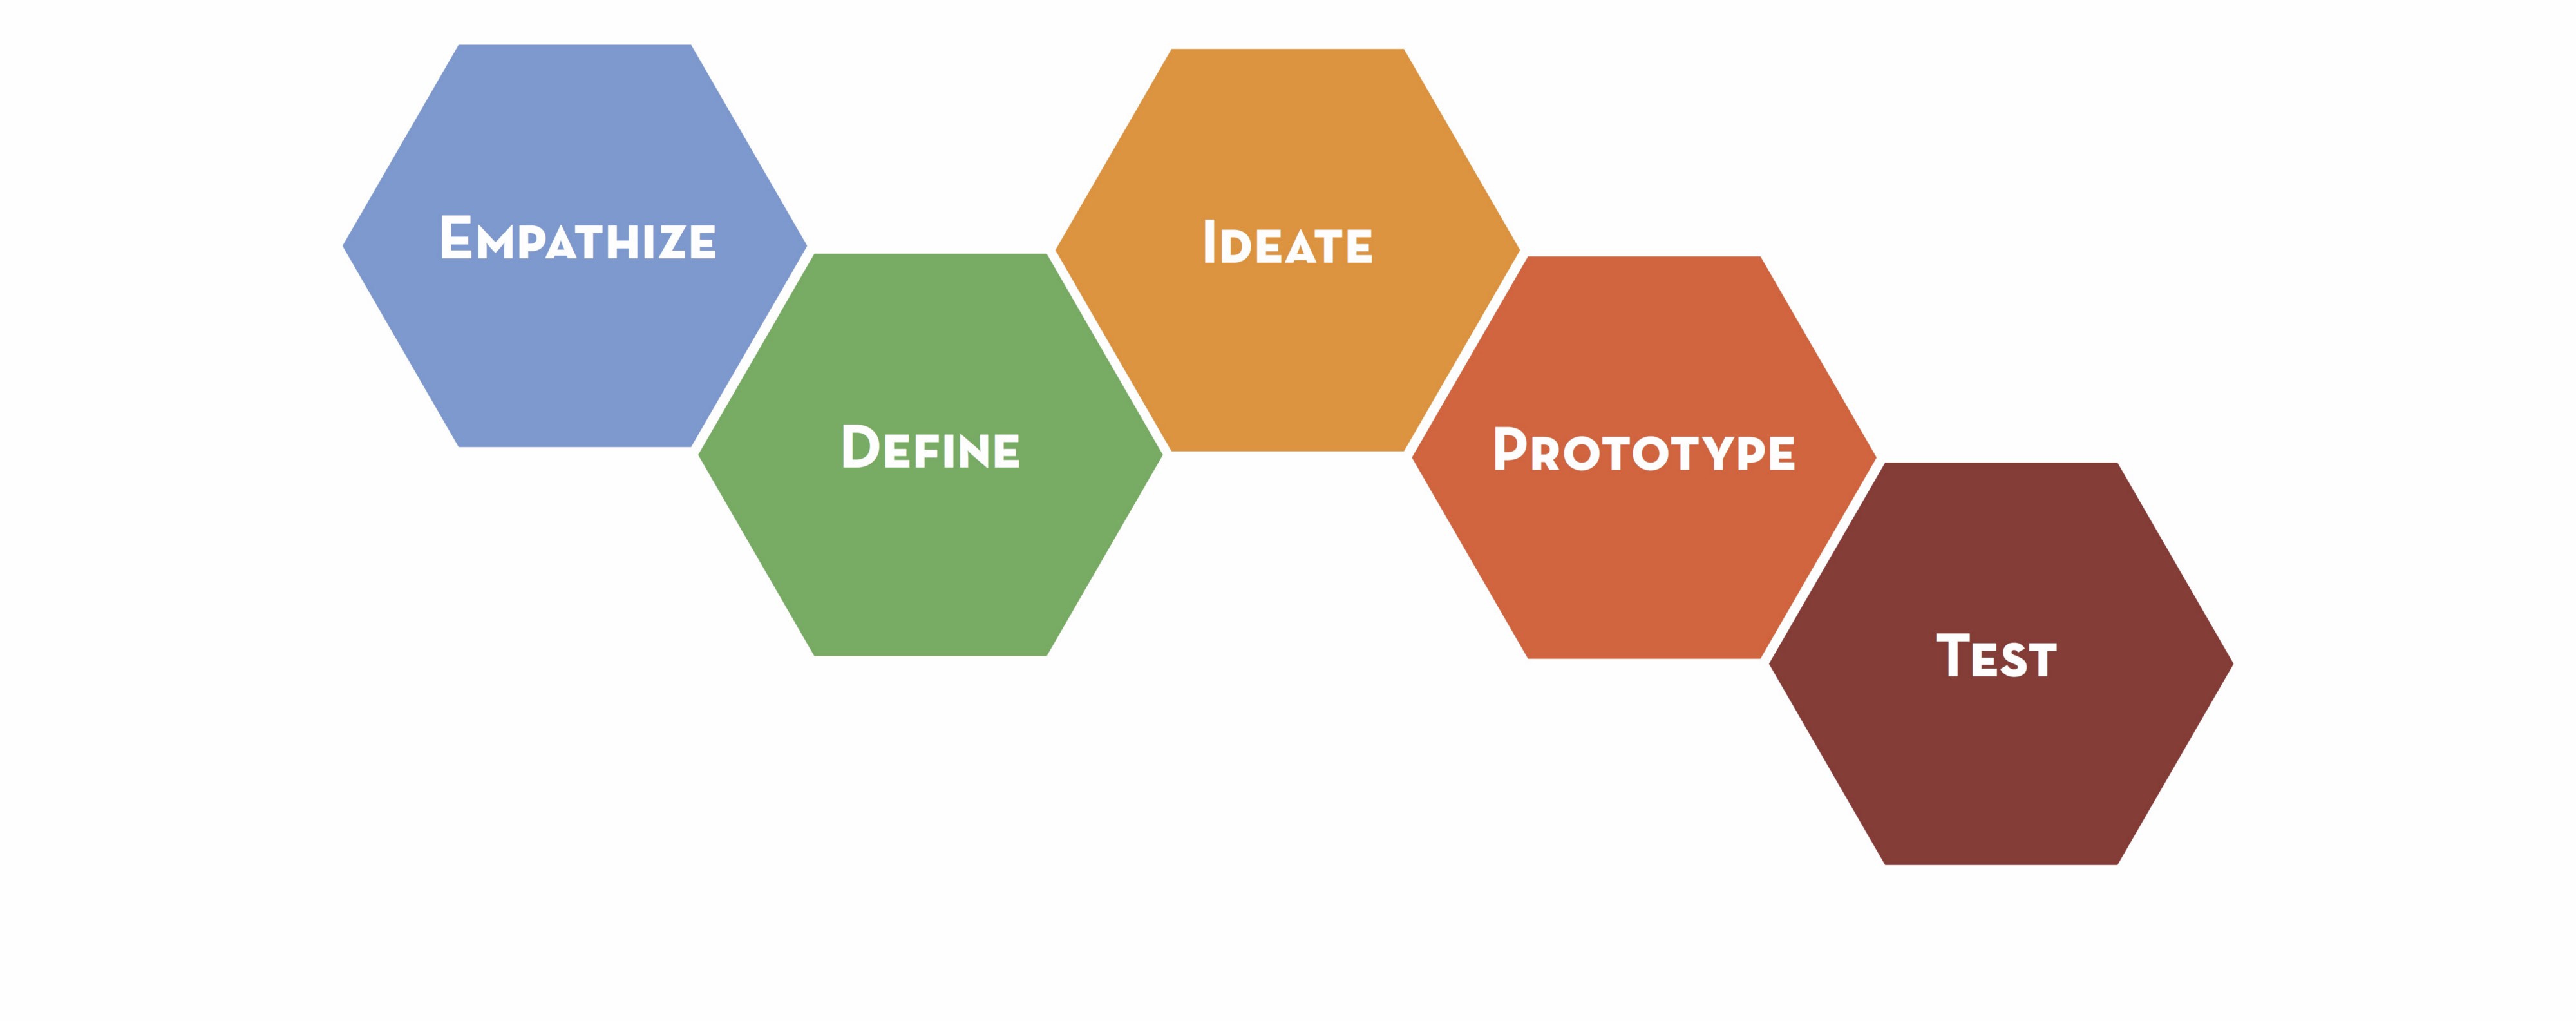 The model proposed by the Stanford design school has five stages of design thinking: Empathise; Define the problem; Ideate; Prototype; and Test.